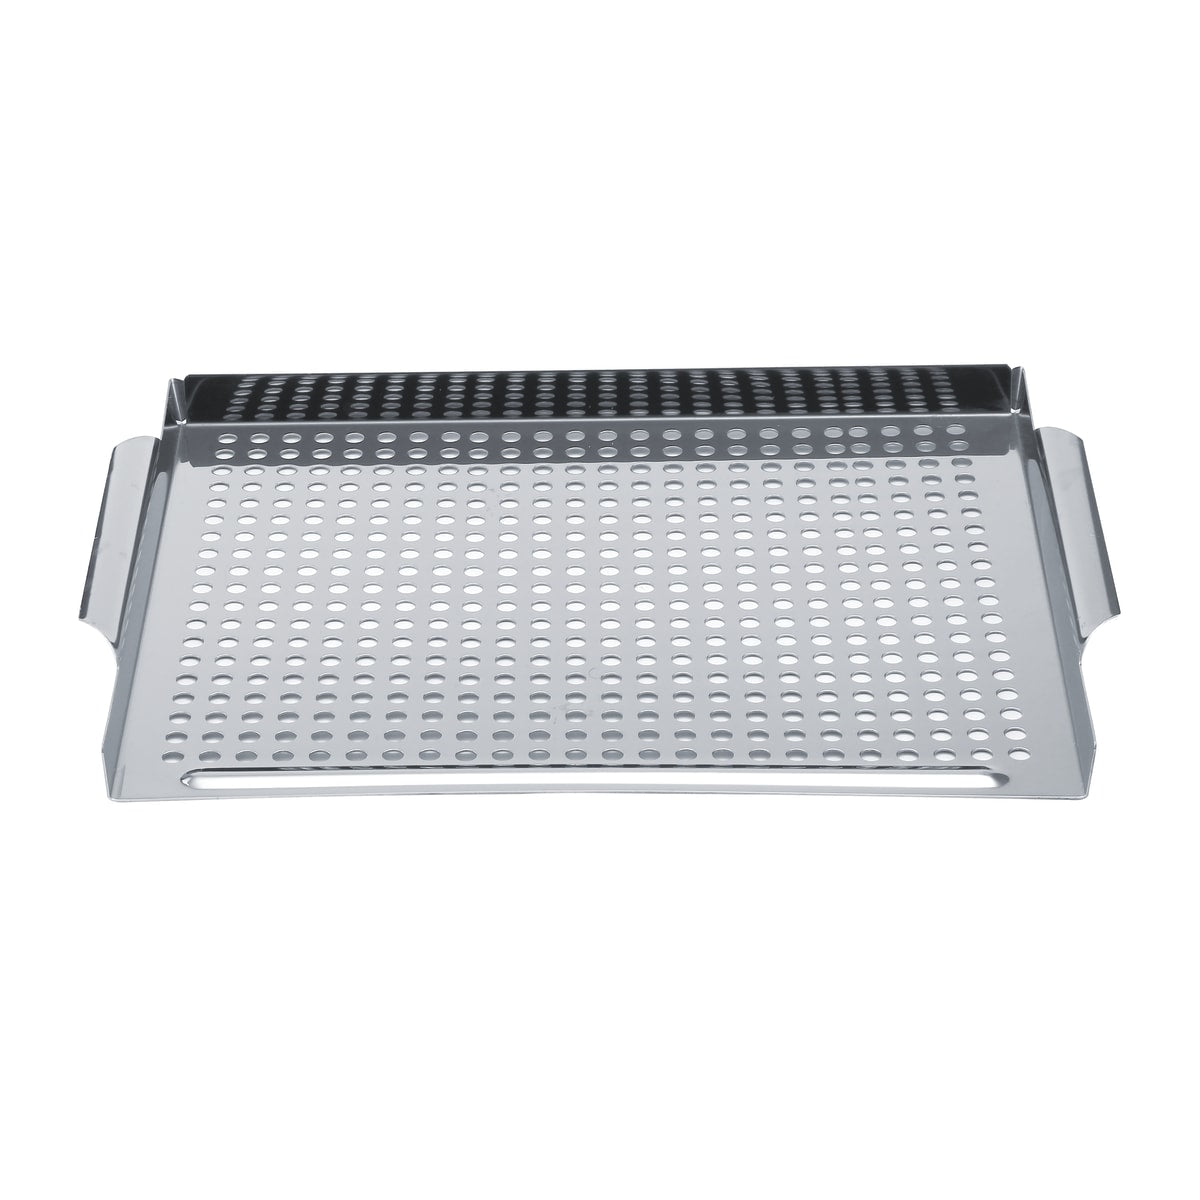 NATERIAL STAINLESS STEEL FOOD TRAY